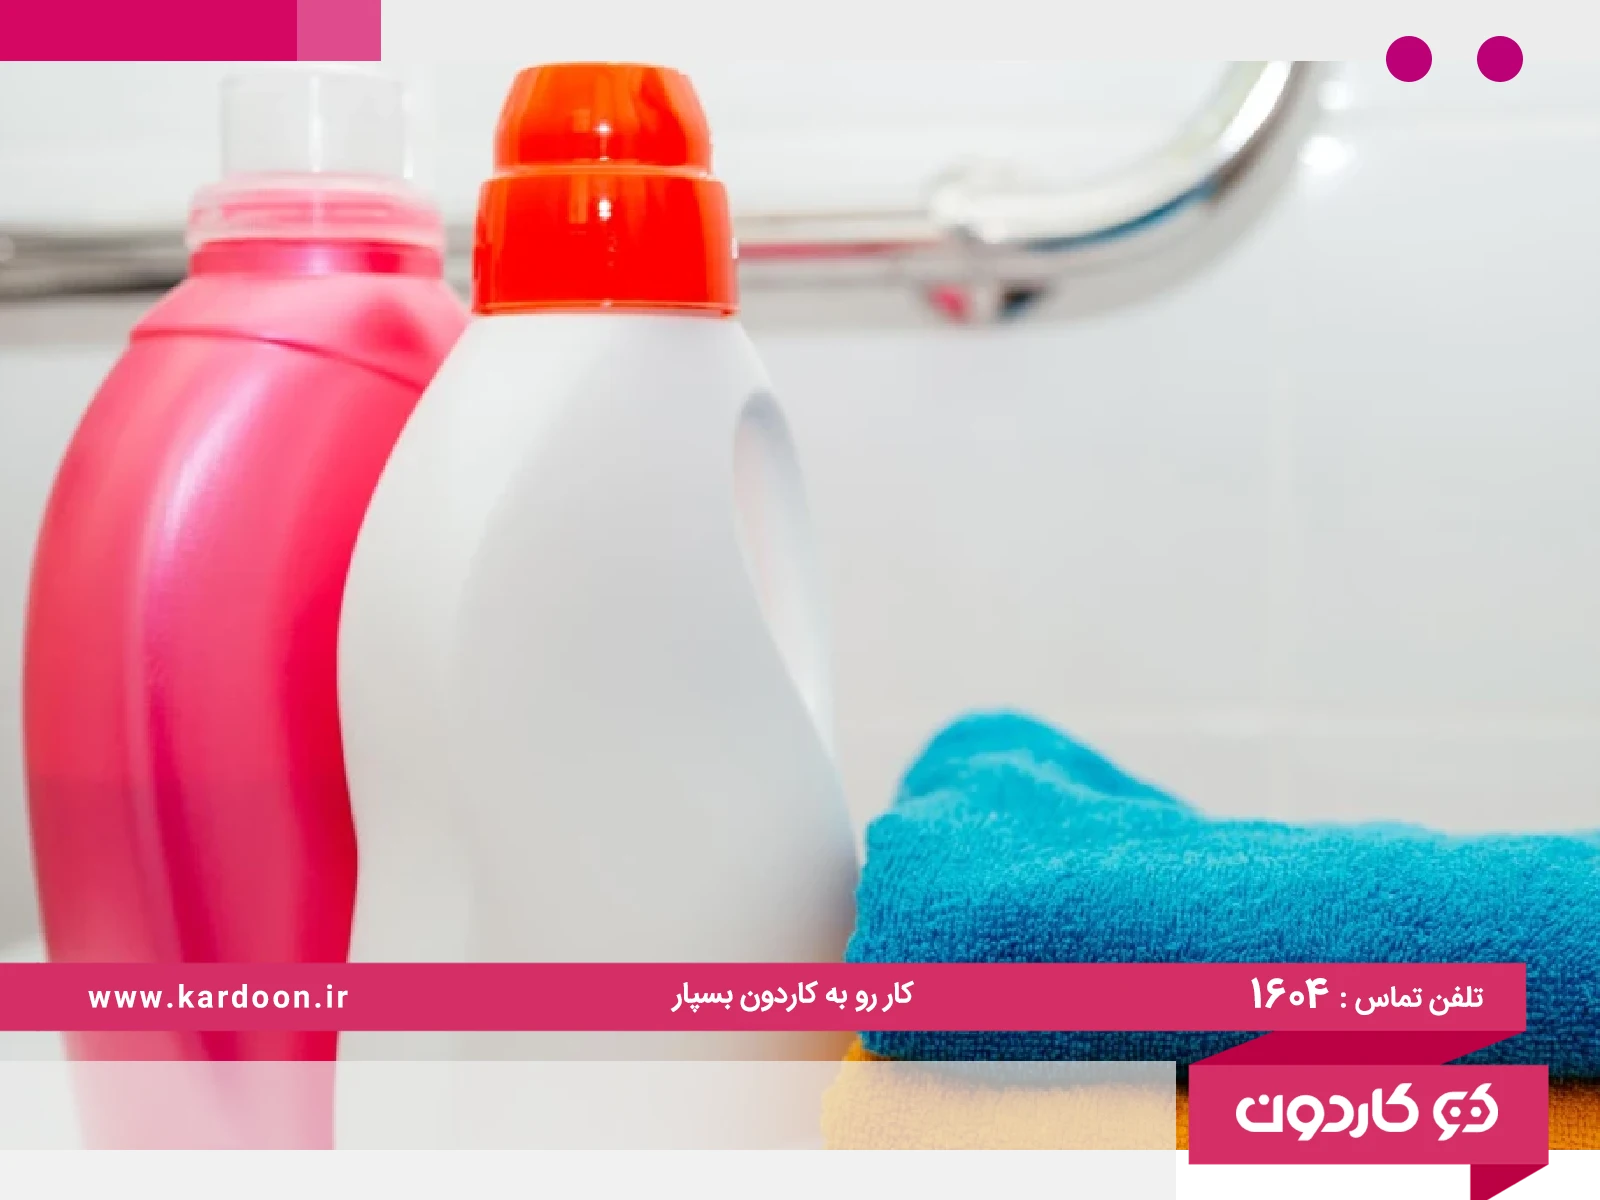 How to use fabric softener in the washing machine